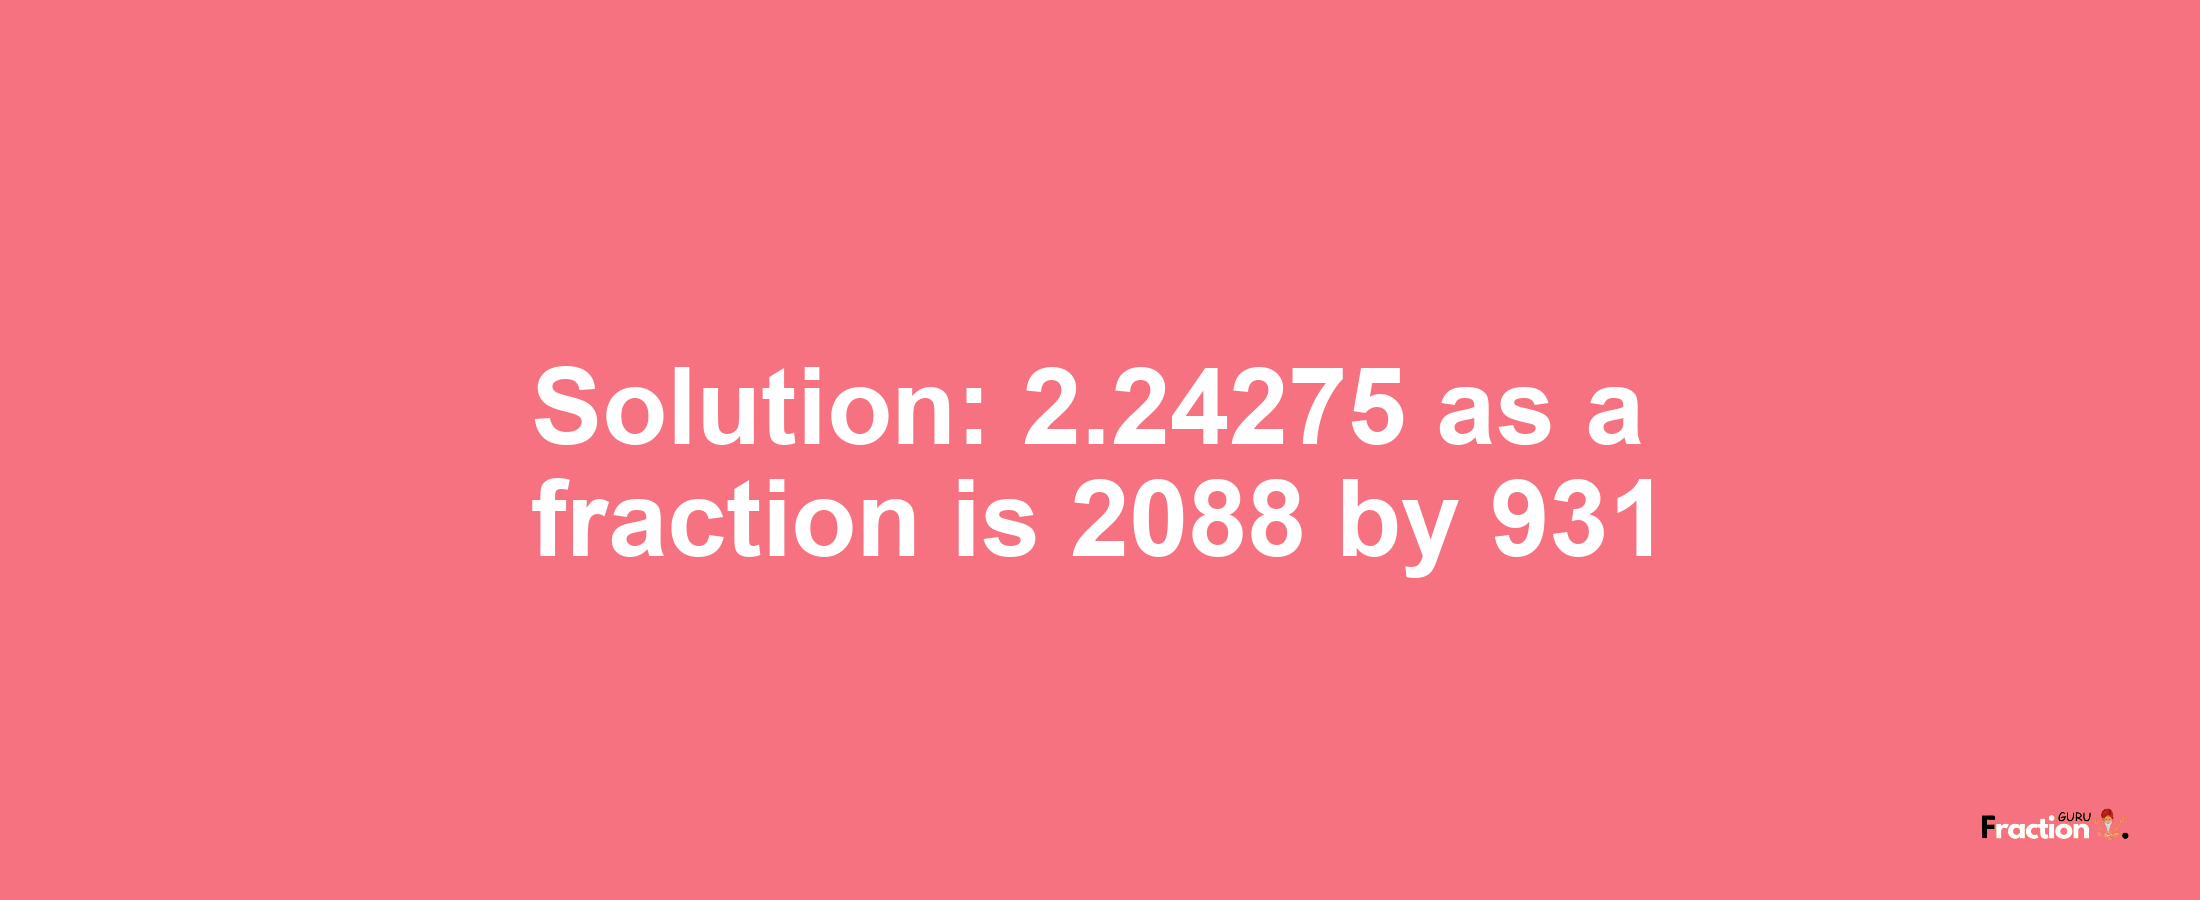 Solution:2.24275 as a fraction is 2088/931